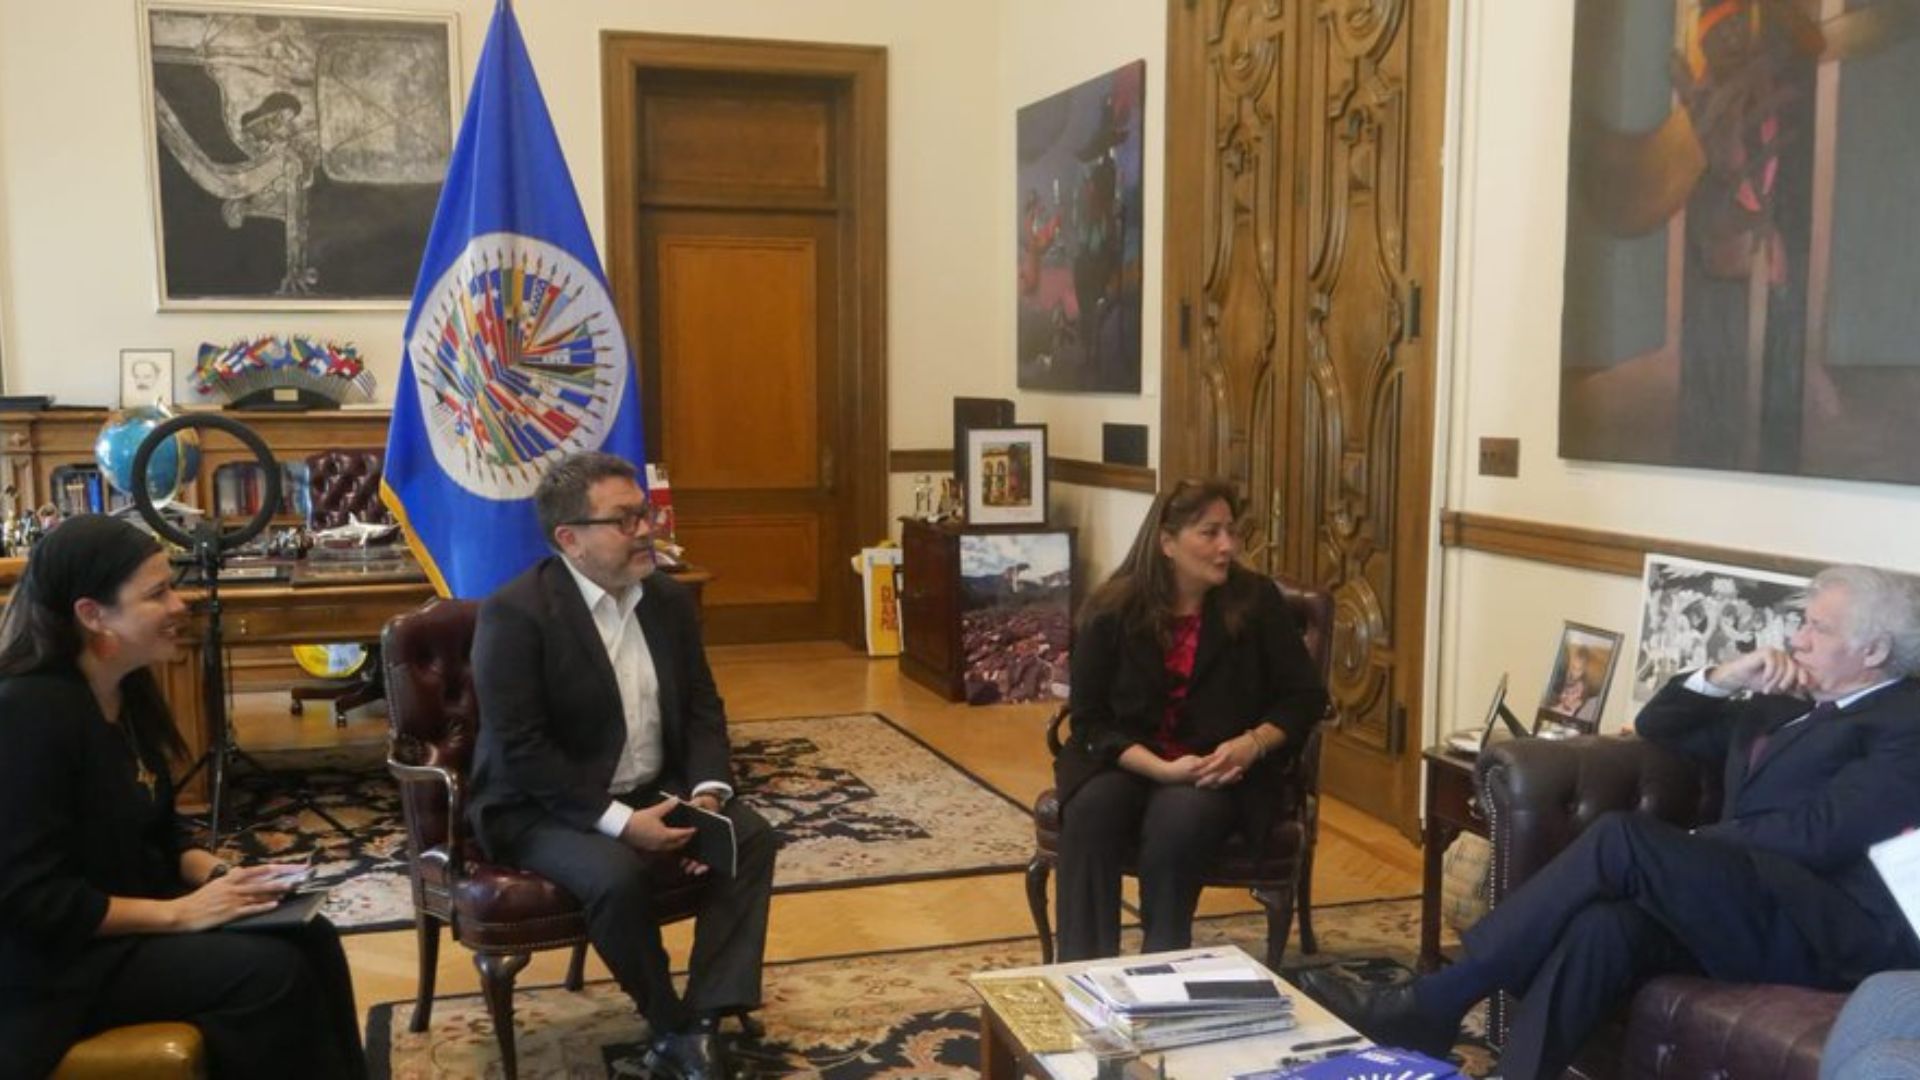 OAS will collaborate with independent UN experts investigating the repression in Nicaragua